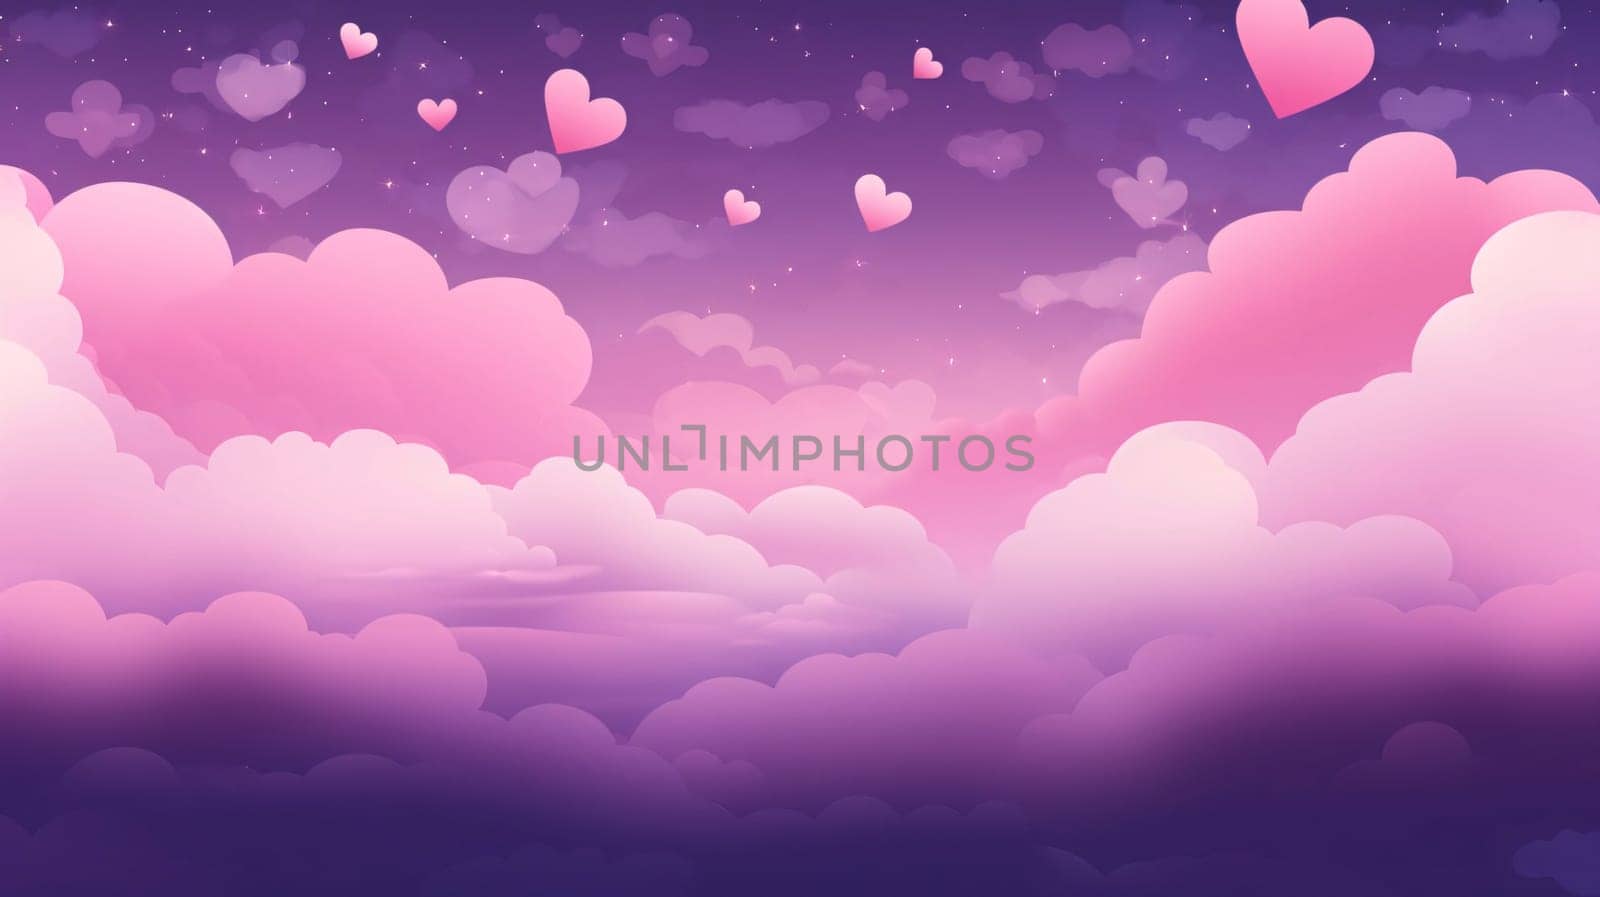 Banner: Valentine's day background with hearts and clouds. Vector illustration.